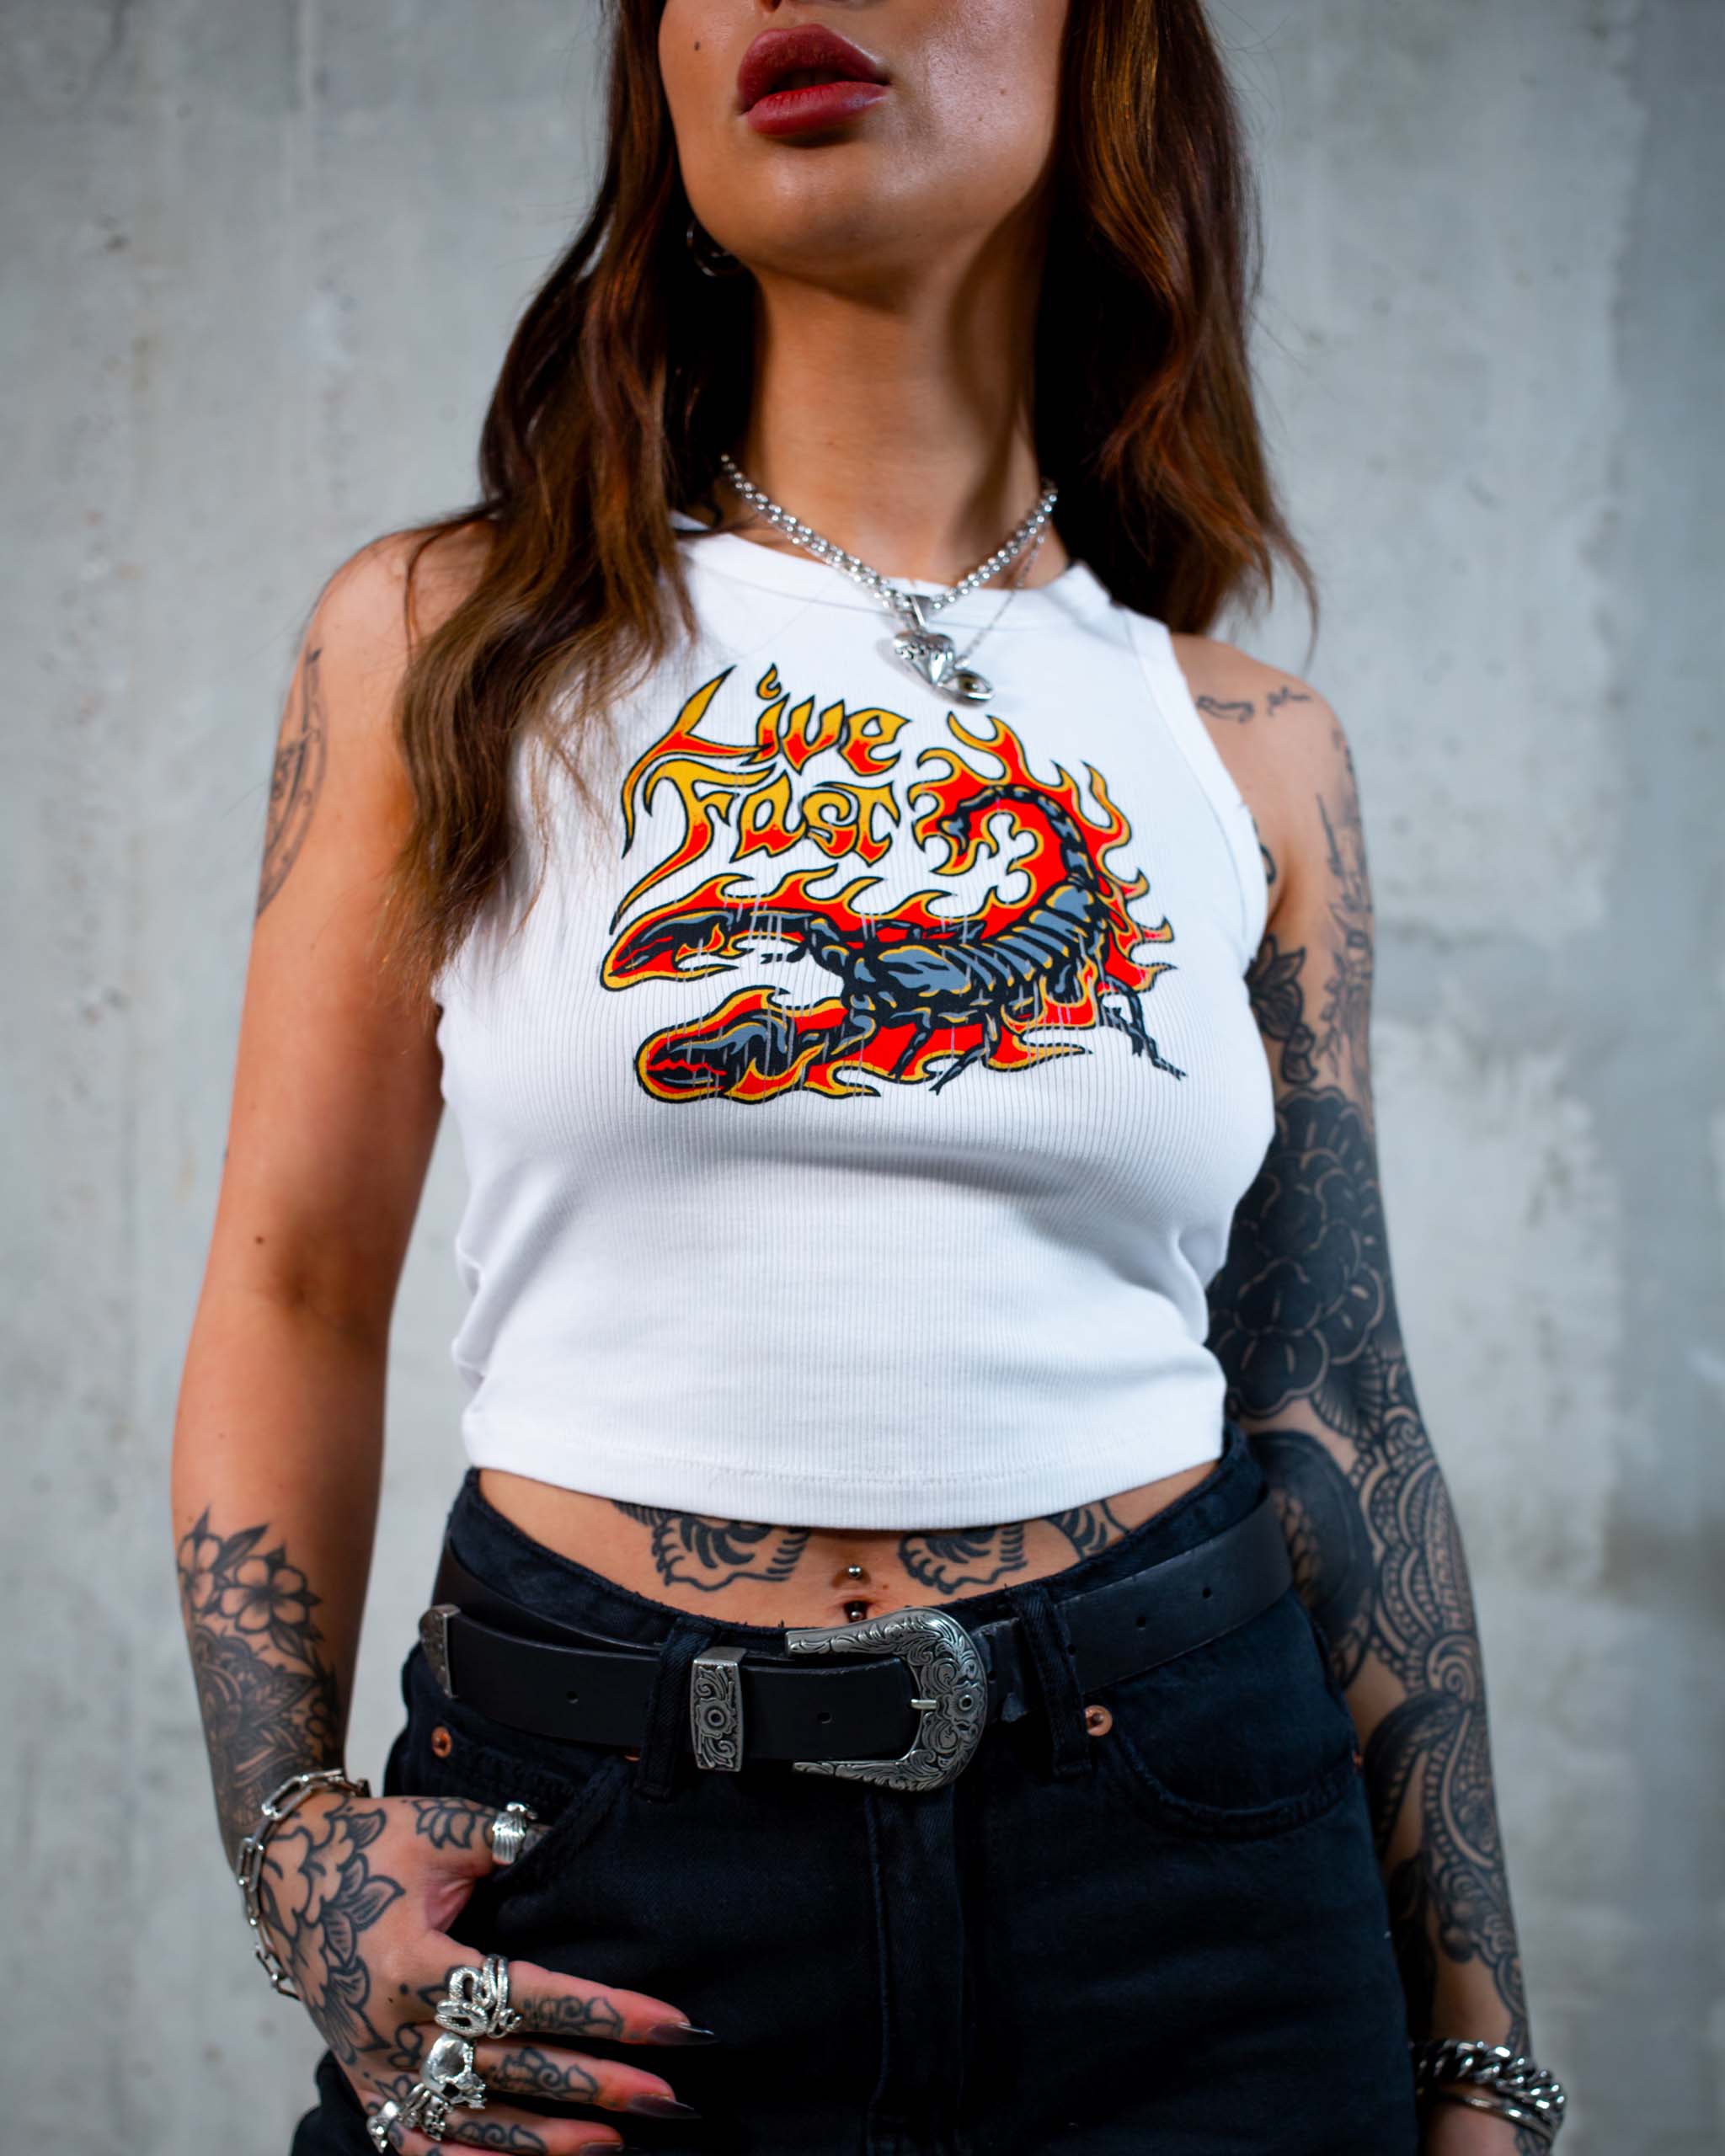 The Live Fast Scorpion tank top by Sleazy Rider, featuring a flaming scorpion graphic.